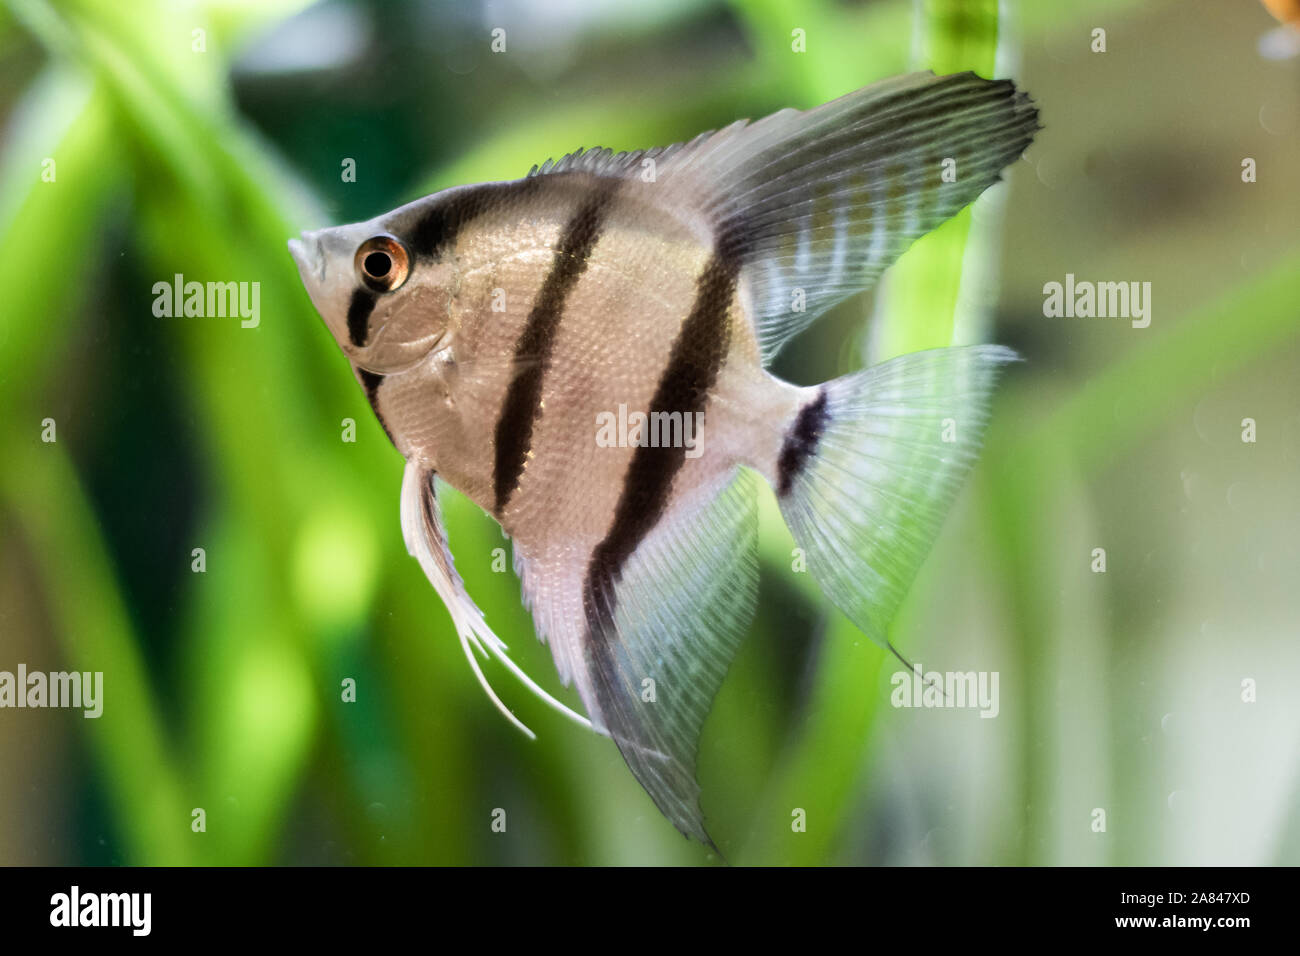 White striped betta fish close up on a green blurry background Stock Photo